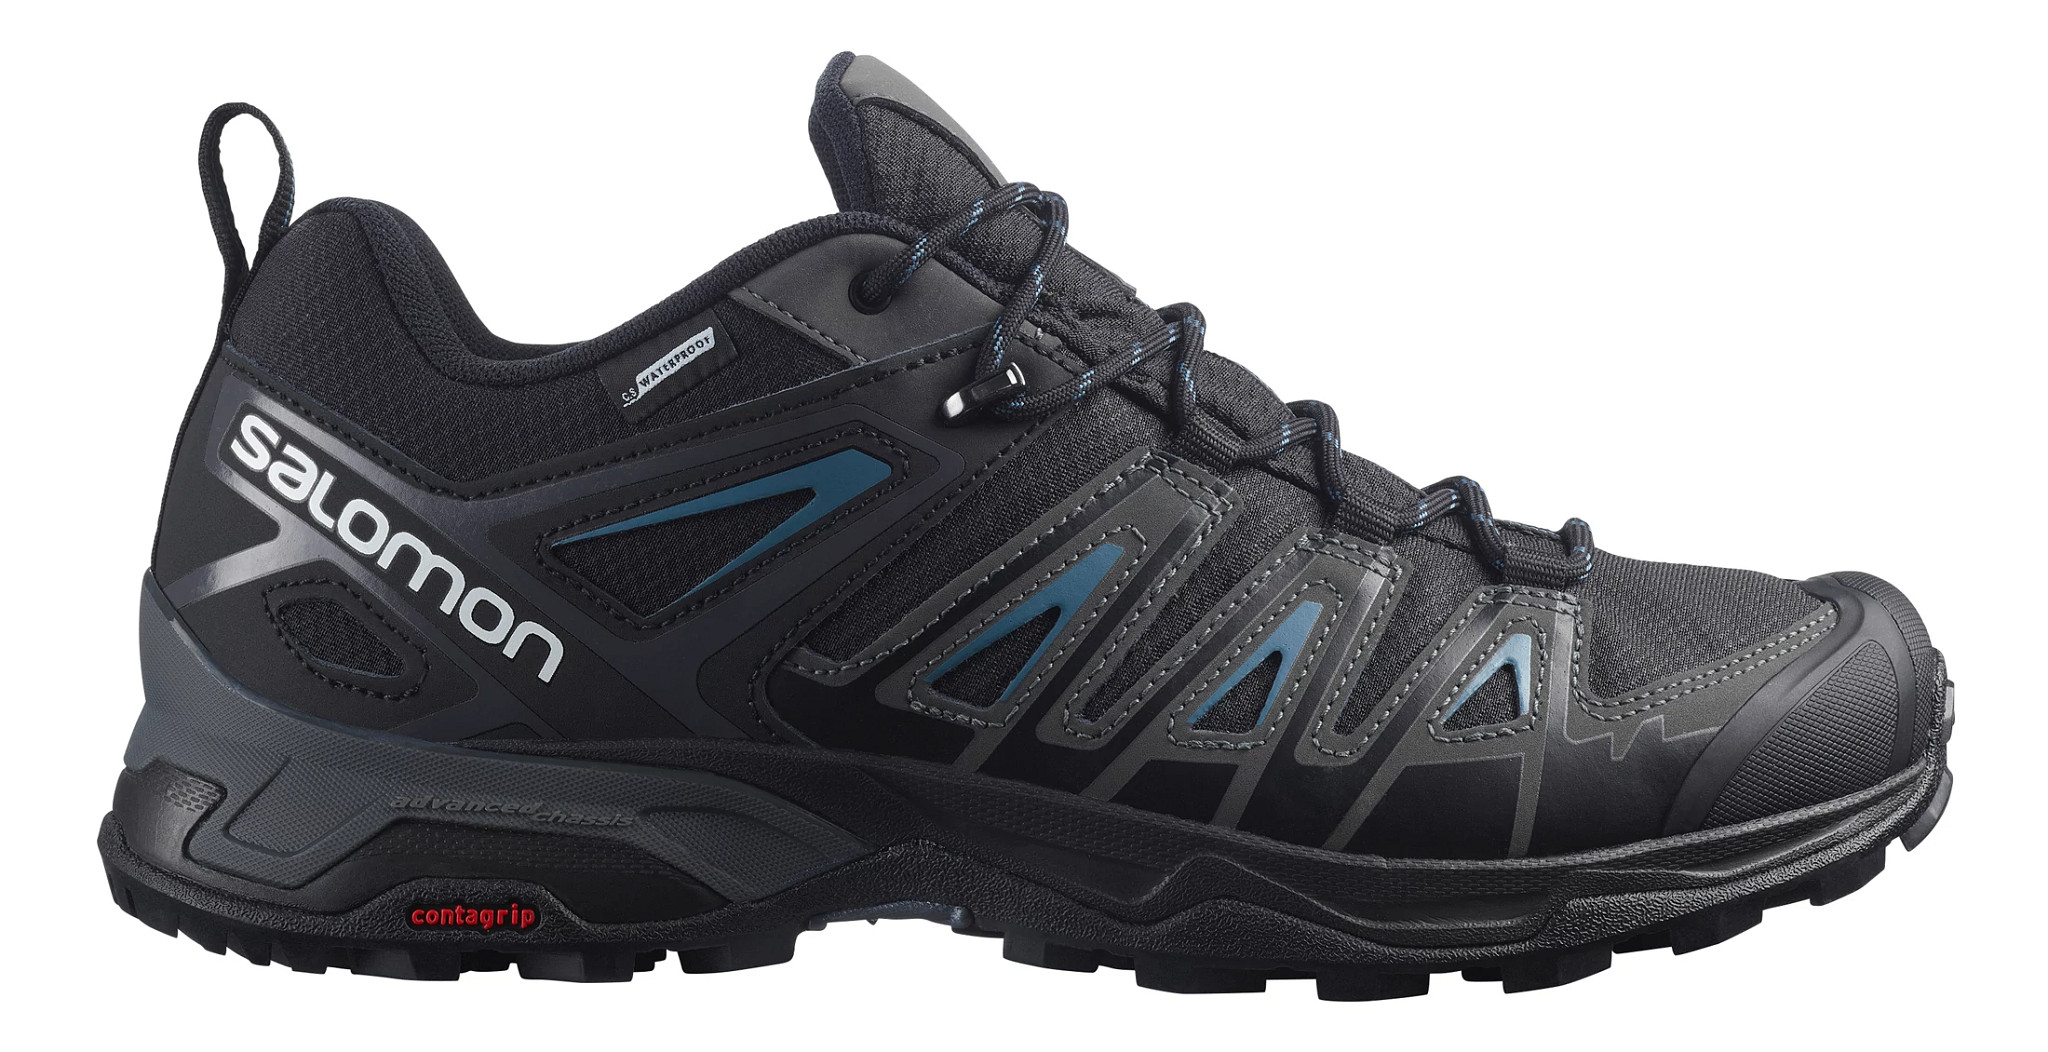 websted hold sneen Mens Salomon X Ultra Pioneer CSWP Hiking Shoe